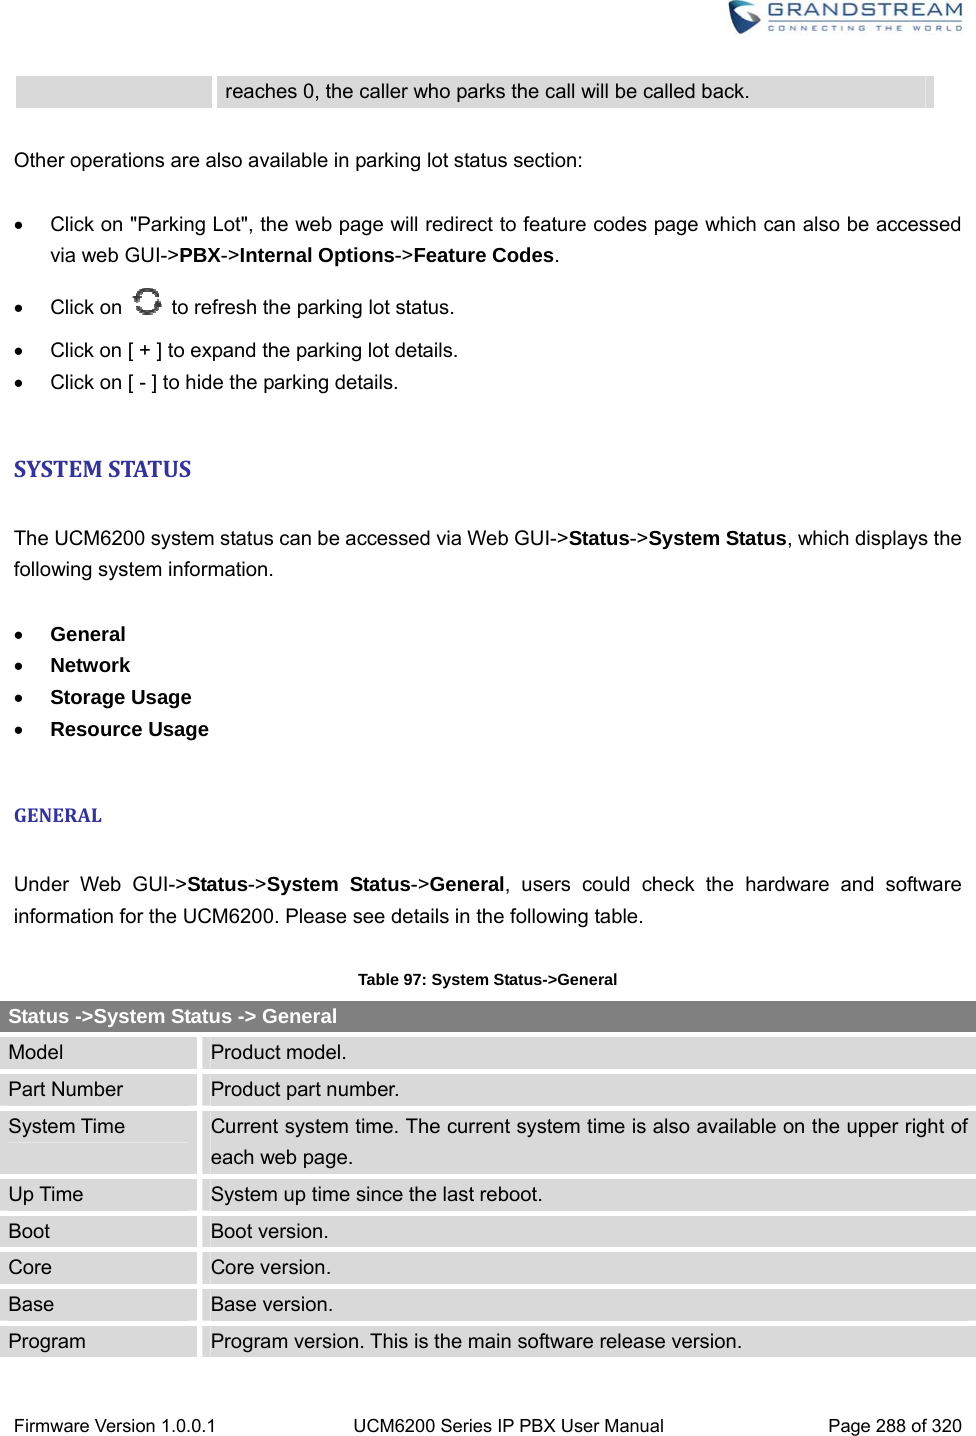  Firmware Version 1.0.0.1  UCM6200 Series IP PBX User Manual  Page 288 of 320 reaches 0, the caller who parks the call will be called back.  Other operations are also available in parking lot status section:    Click on &quot;Parking Lot&quot;, the web page will redirect to feature codes page which can also be accessed via web GUI-&gt;PBX-&gt;Internal Options-&gt;Feature Codes.  Click on    to refresh the parking lot status.   Click on [ + ] to expand the parking lot details.   Click on [ - ] to hide the parking details.  SYSTEMSTATUS The UCM6200 system status can be accessed via Web GUI-&gt;Status-&gt;System Status, which displays the following system information.   General  Network  Storage Usage  Resource Usage  GENERAL Under Web GUI-&gt;Status-&gt;System Status-&gt;General, users could check the hardware and software information for the UCM6200. Please see details in the following table.  Table 97: System Status-&gt;General Status -&gt;System Status -&gt; General Model  Product model. Part Number  Product part number. System Time  Current system time. The current system time is also available on the upper right of each web page. Up Time  System up time since the last reboot. Boot  Boot version. Core  Core version. Base  Base version. Program  Program version. This is the main software release version. 